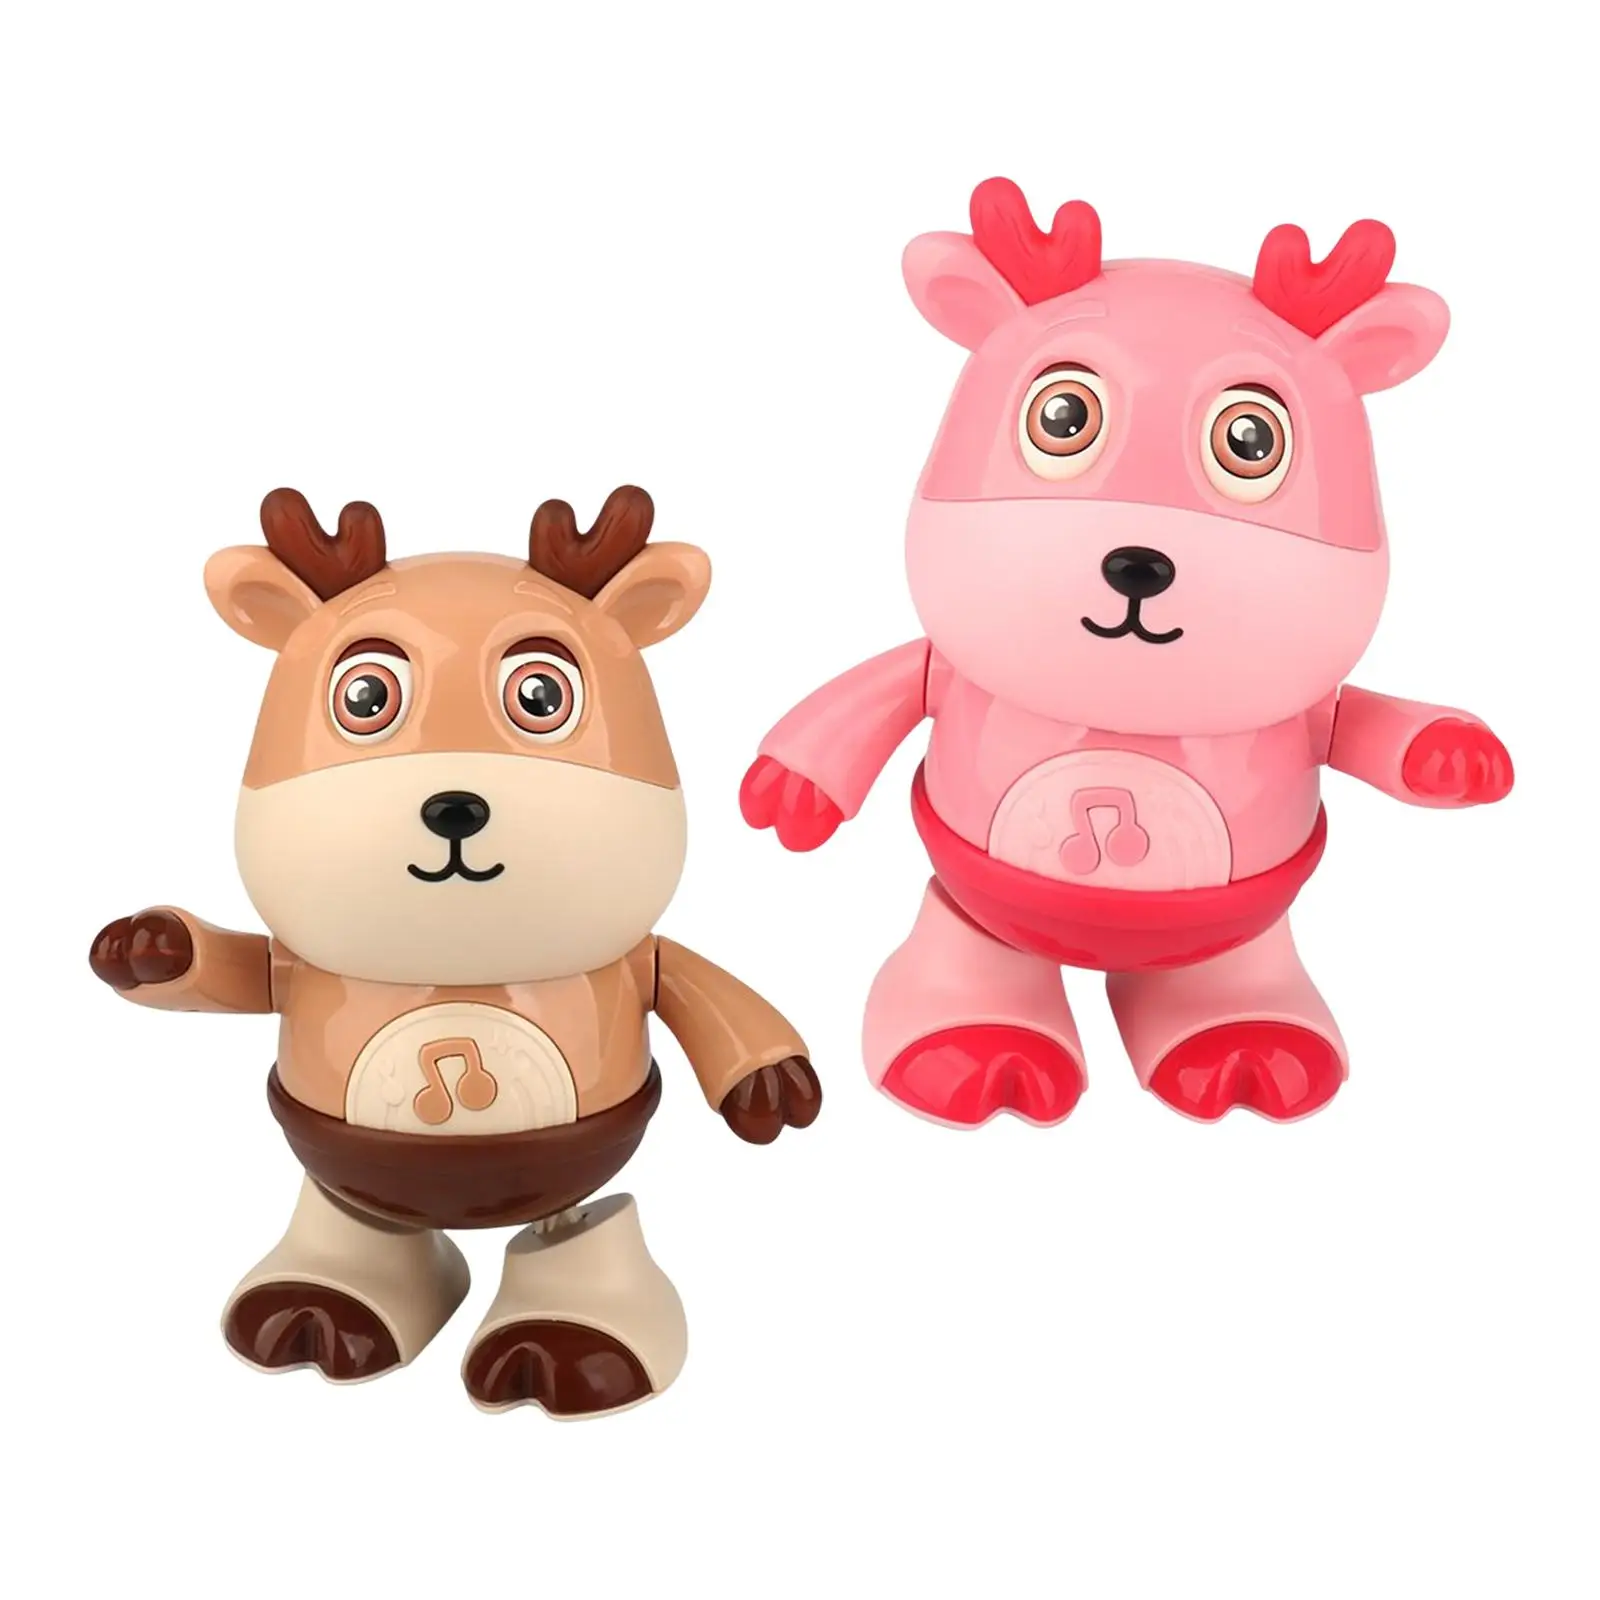 Musical Dancing Deer Toy Learning Toy Dance Animal Doll Deer Musical Toy Interactive Dancing Swing Deer Toy for Decoration Gift